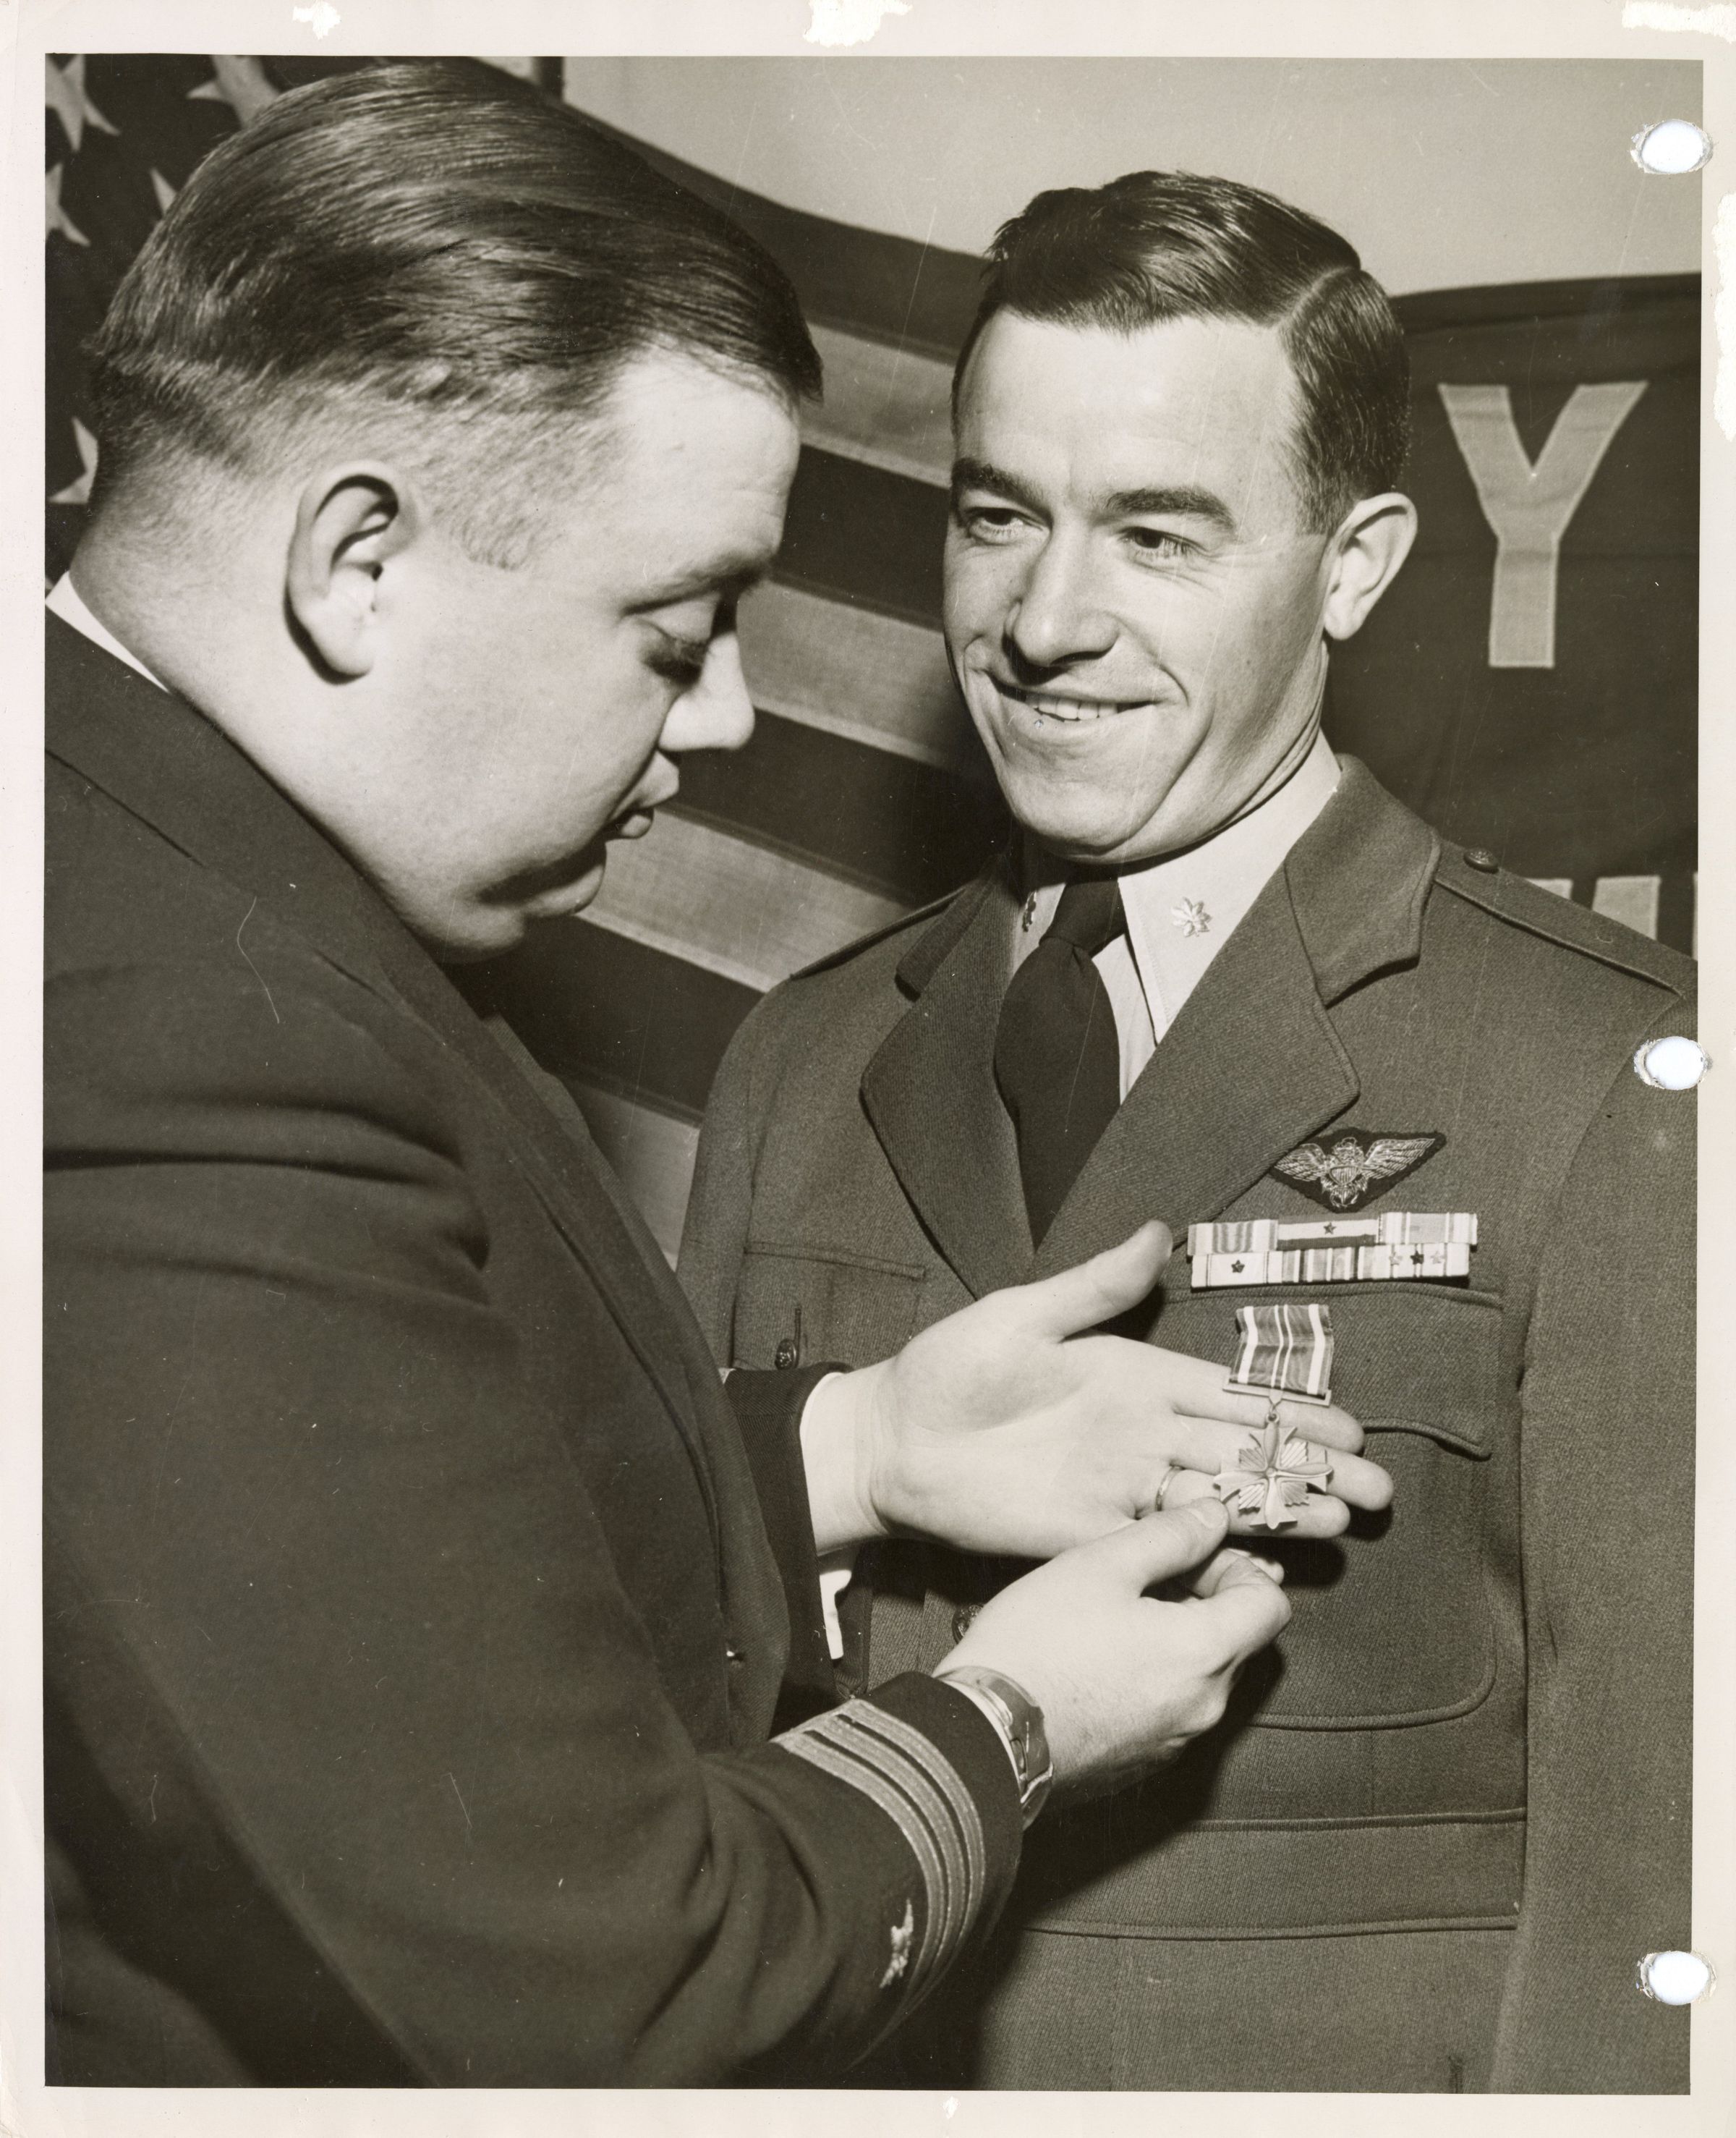 Primary Image of Joseph Kristufek Receiving Distinguished Flying Cross and Four Clusters